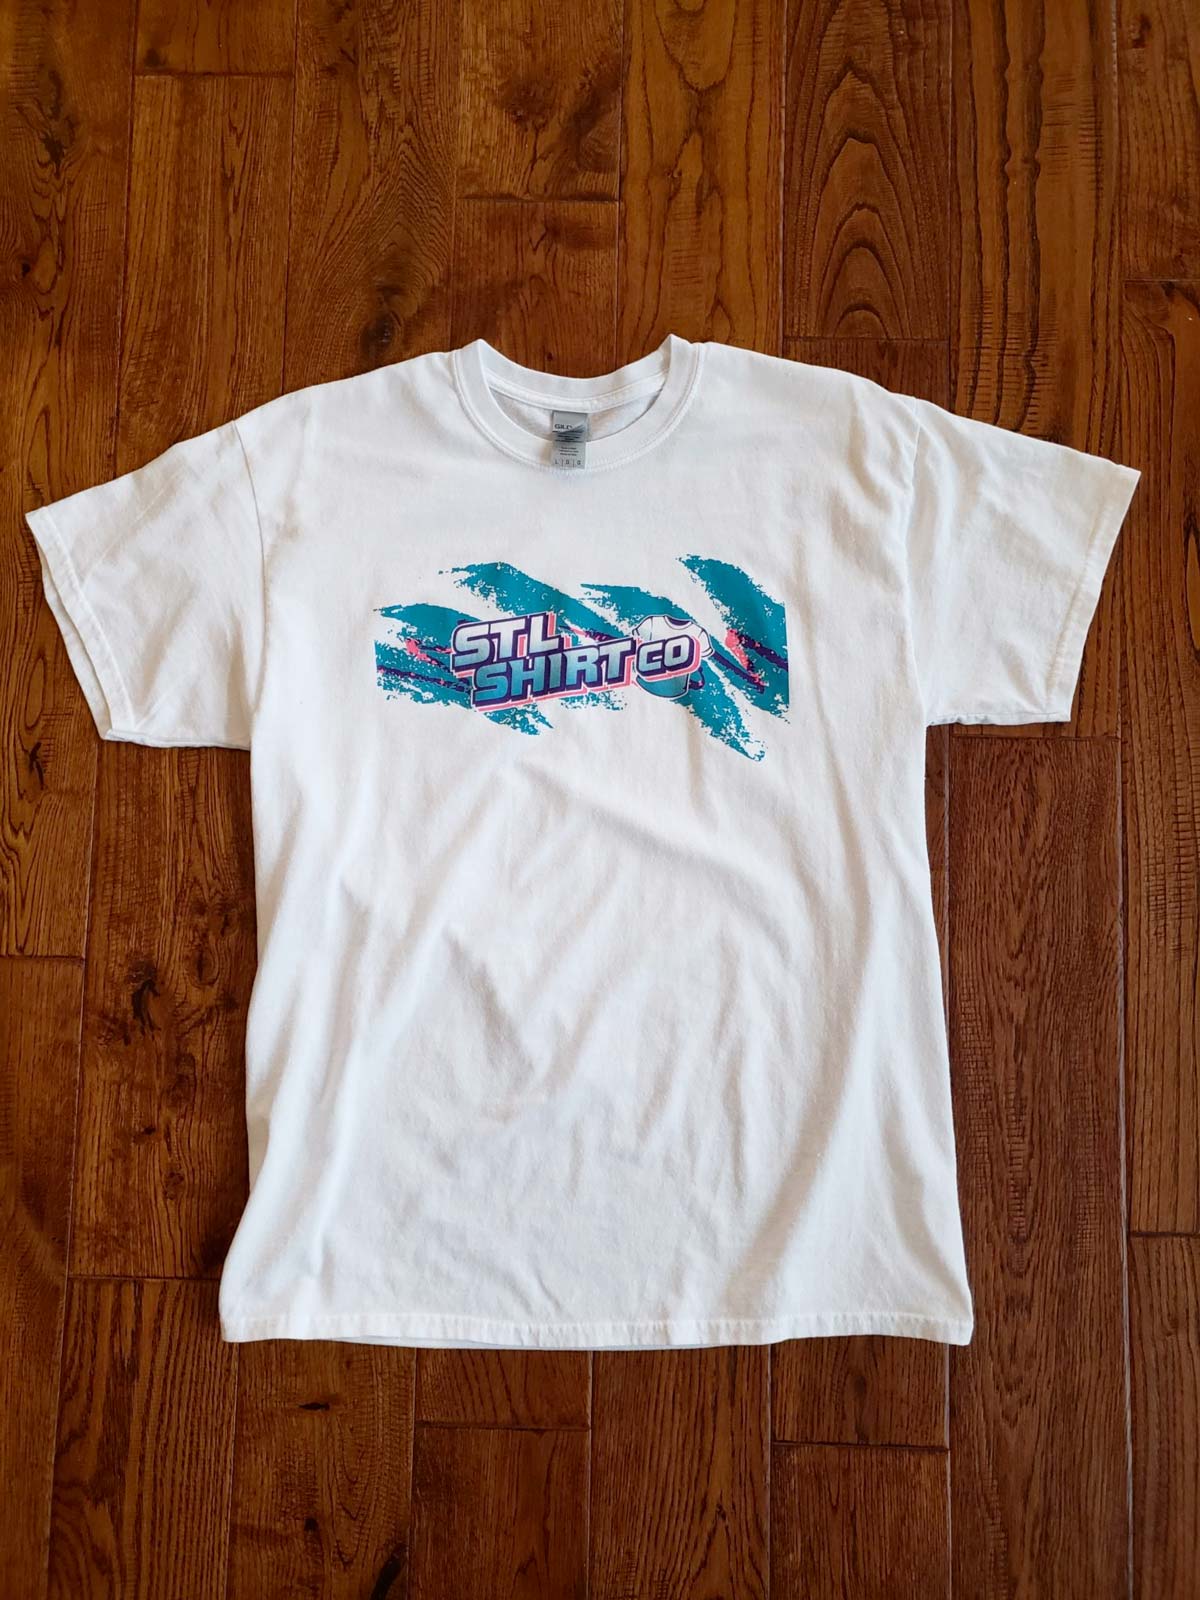 St. Louis Screen Printing & Embroidery | STL Shirt Co